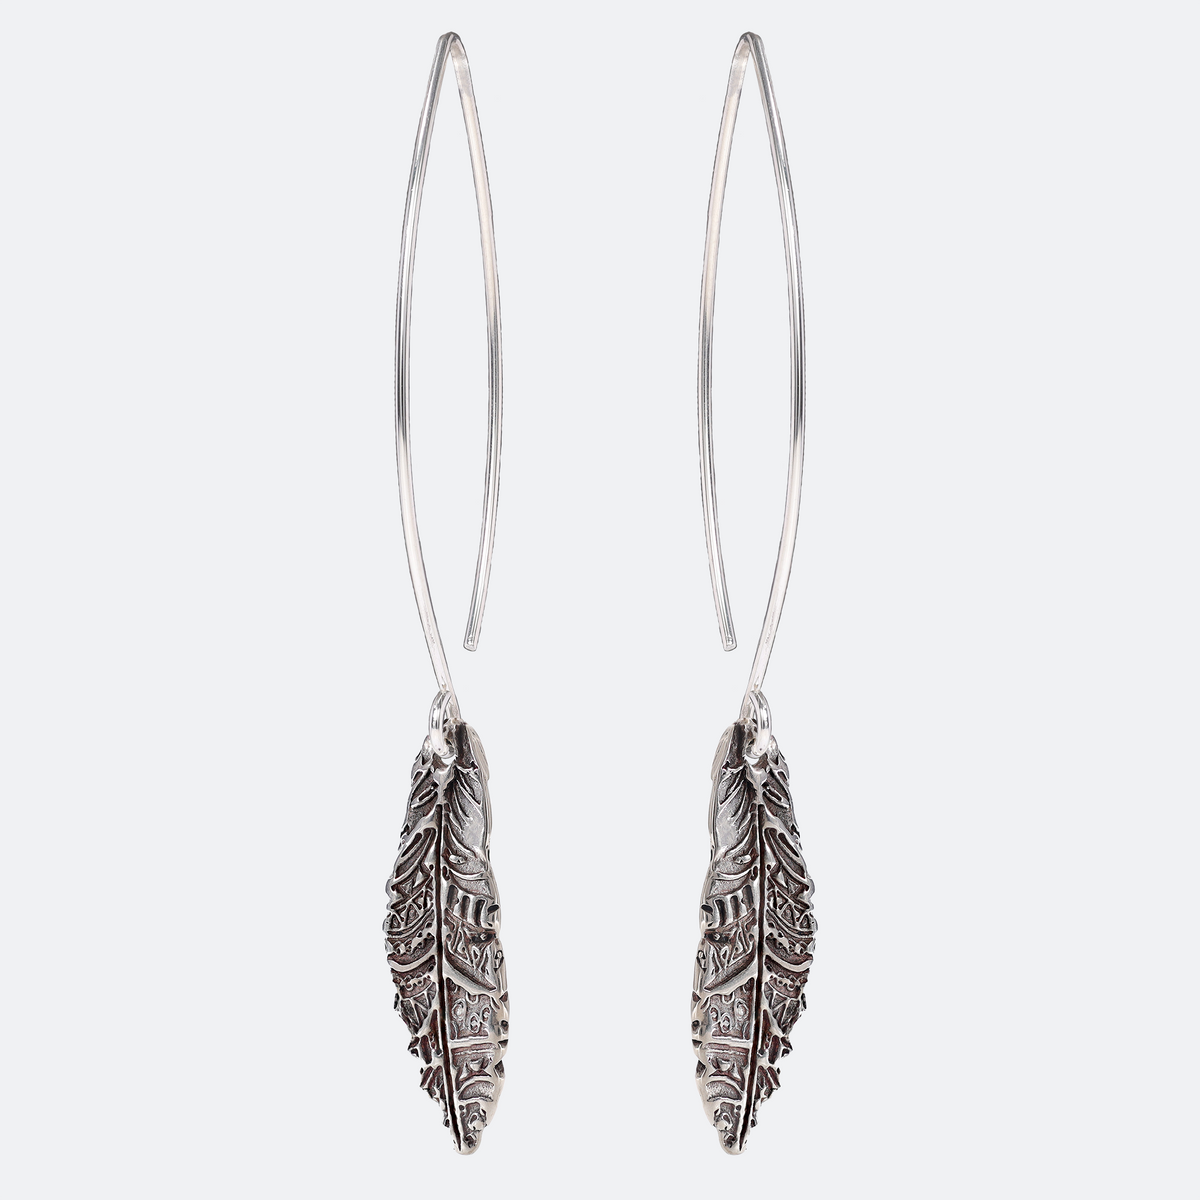 Feather Textured Small Sterling Silver Earrings on Long Ear Wires